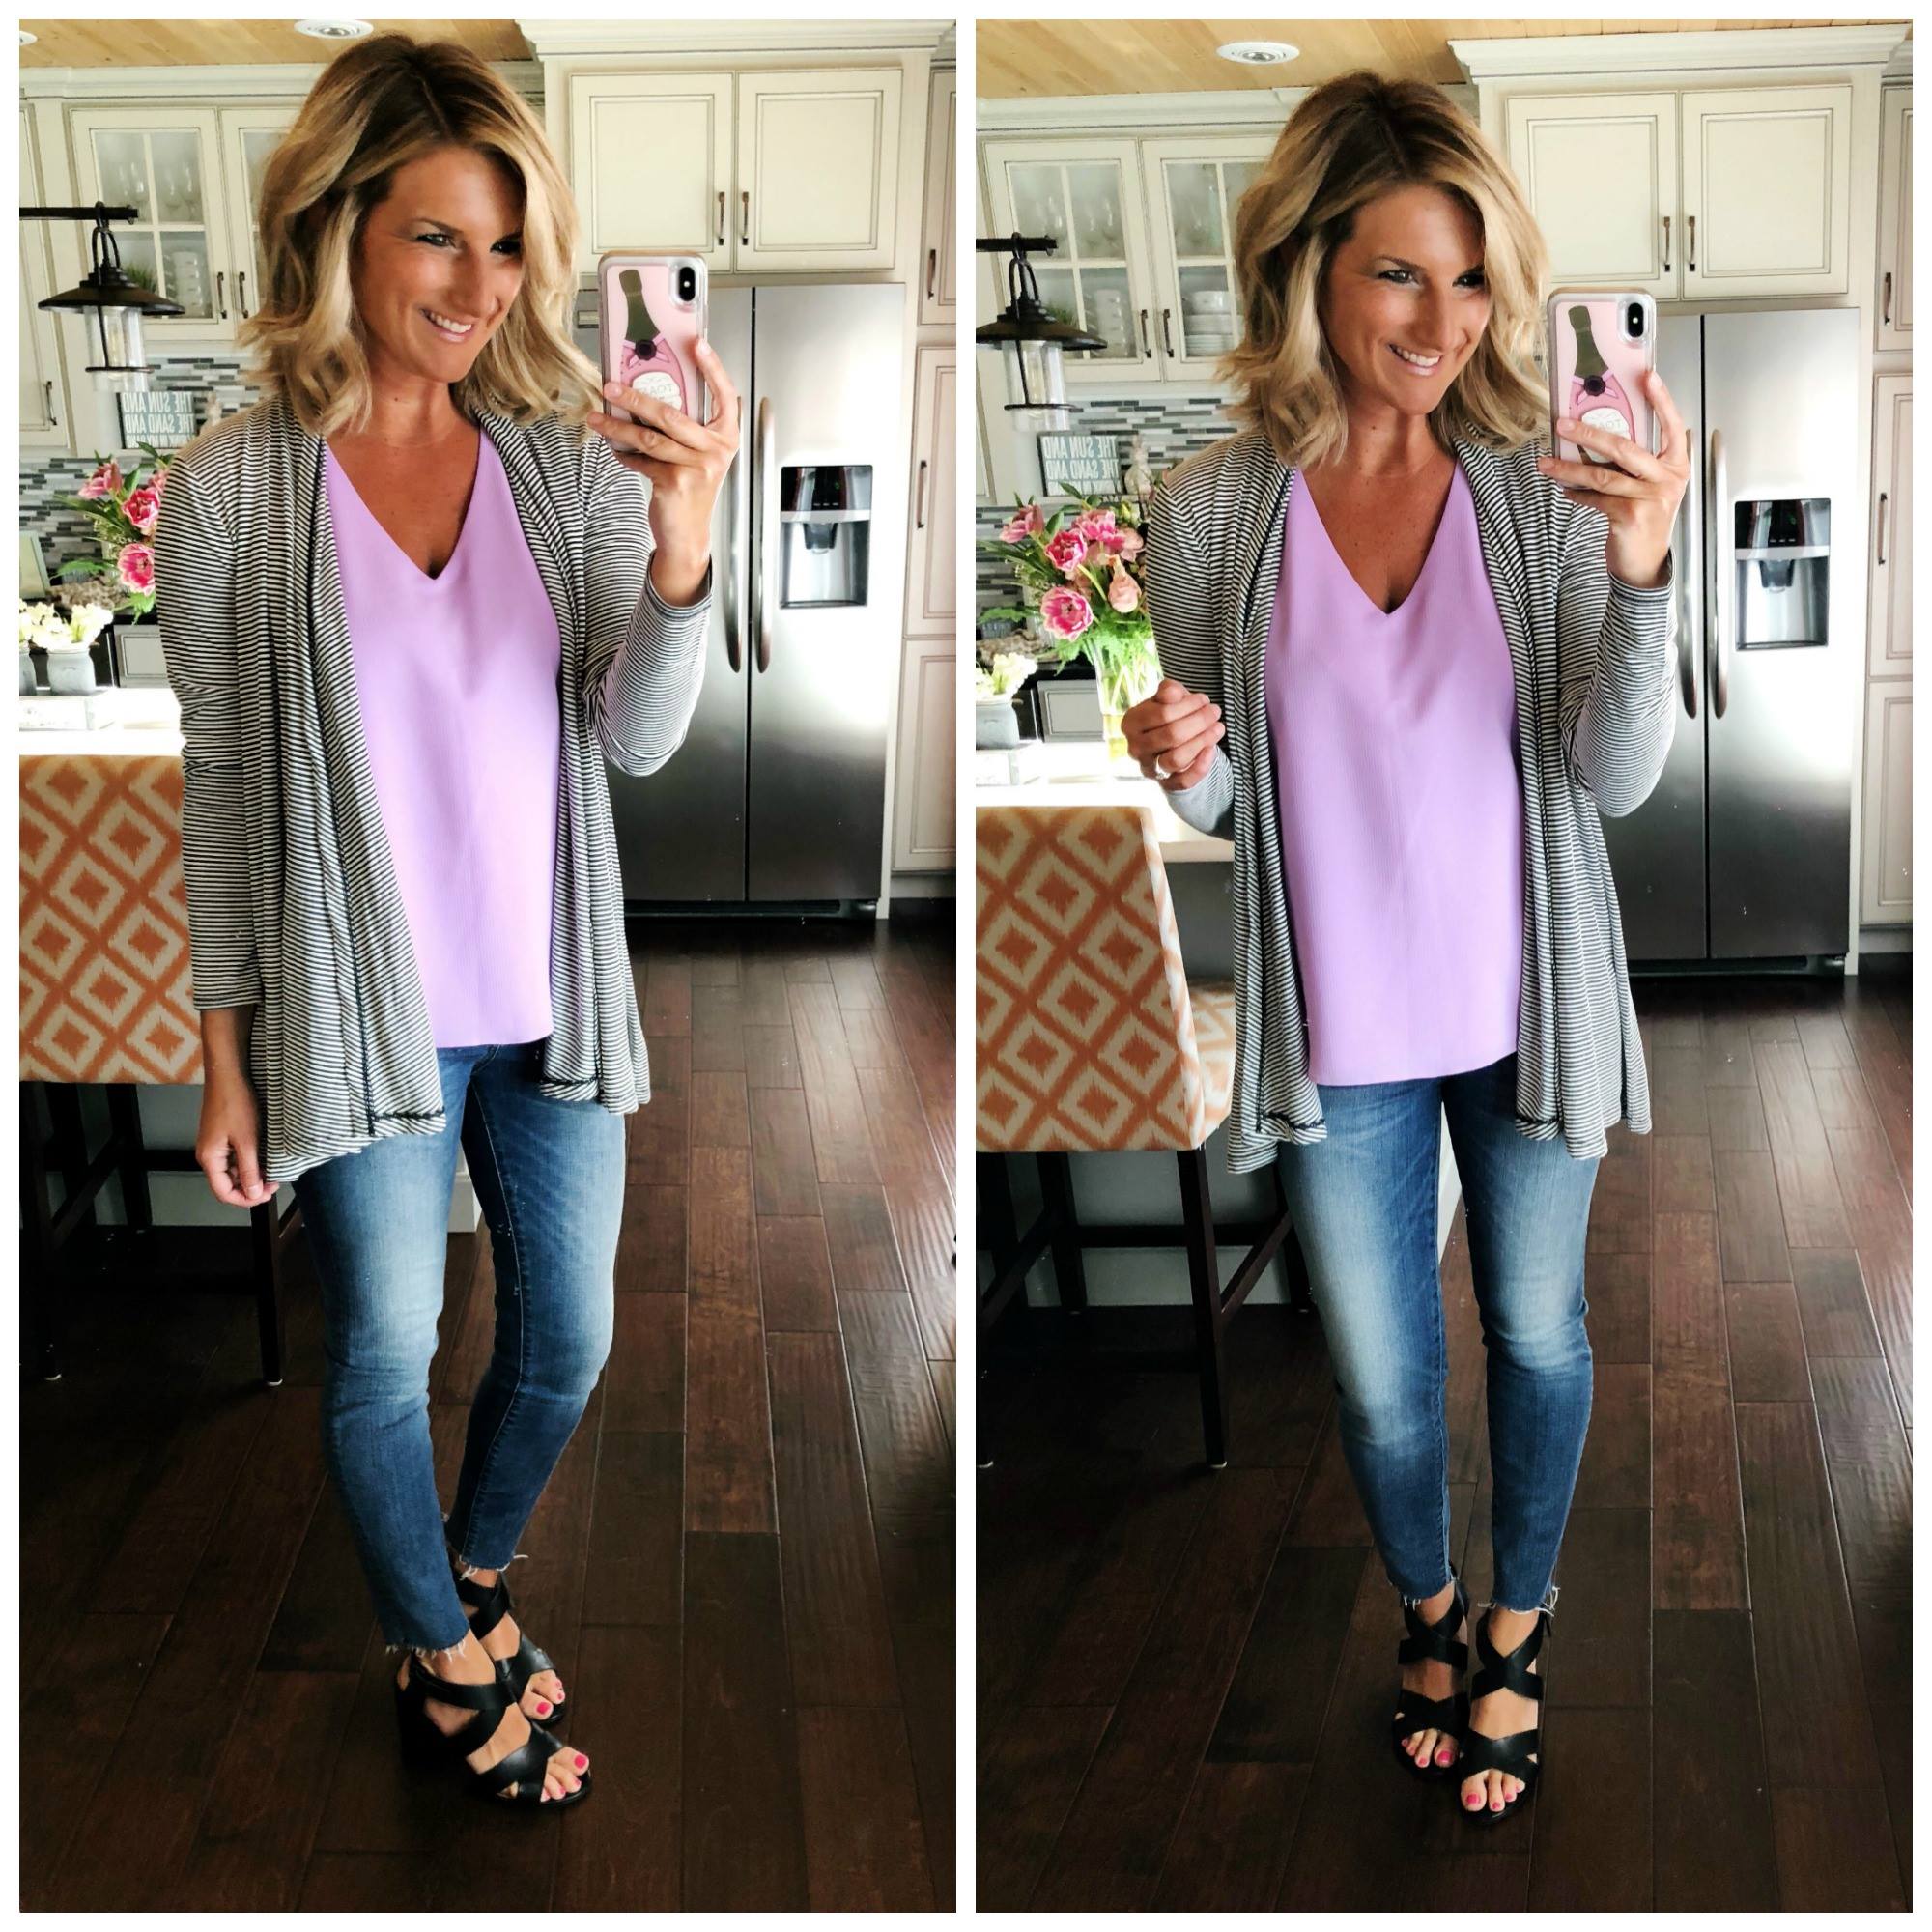 The Perfect Date Night Outfit // Lavender Top + Released Hem Skinny Jeans + Striped Cardigan + Block Heel Sandal